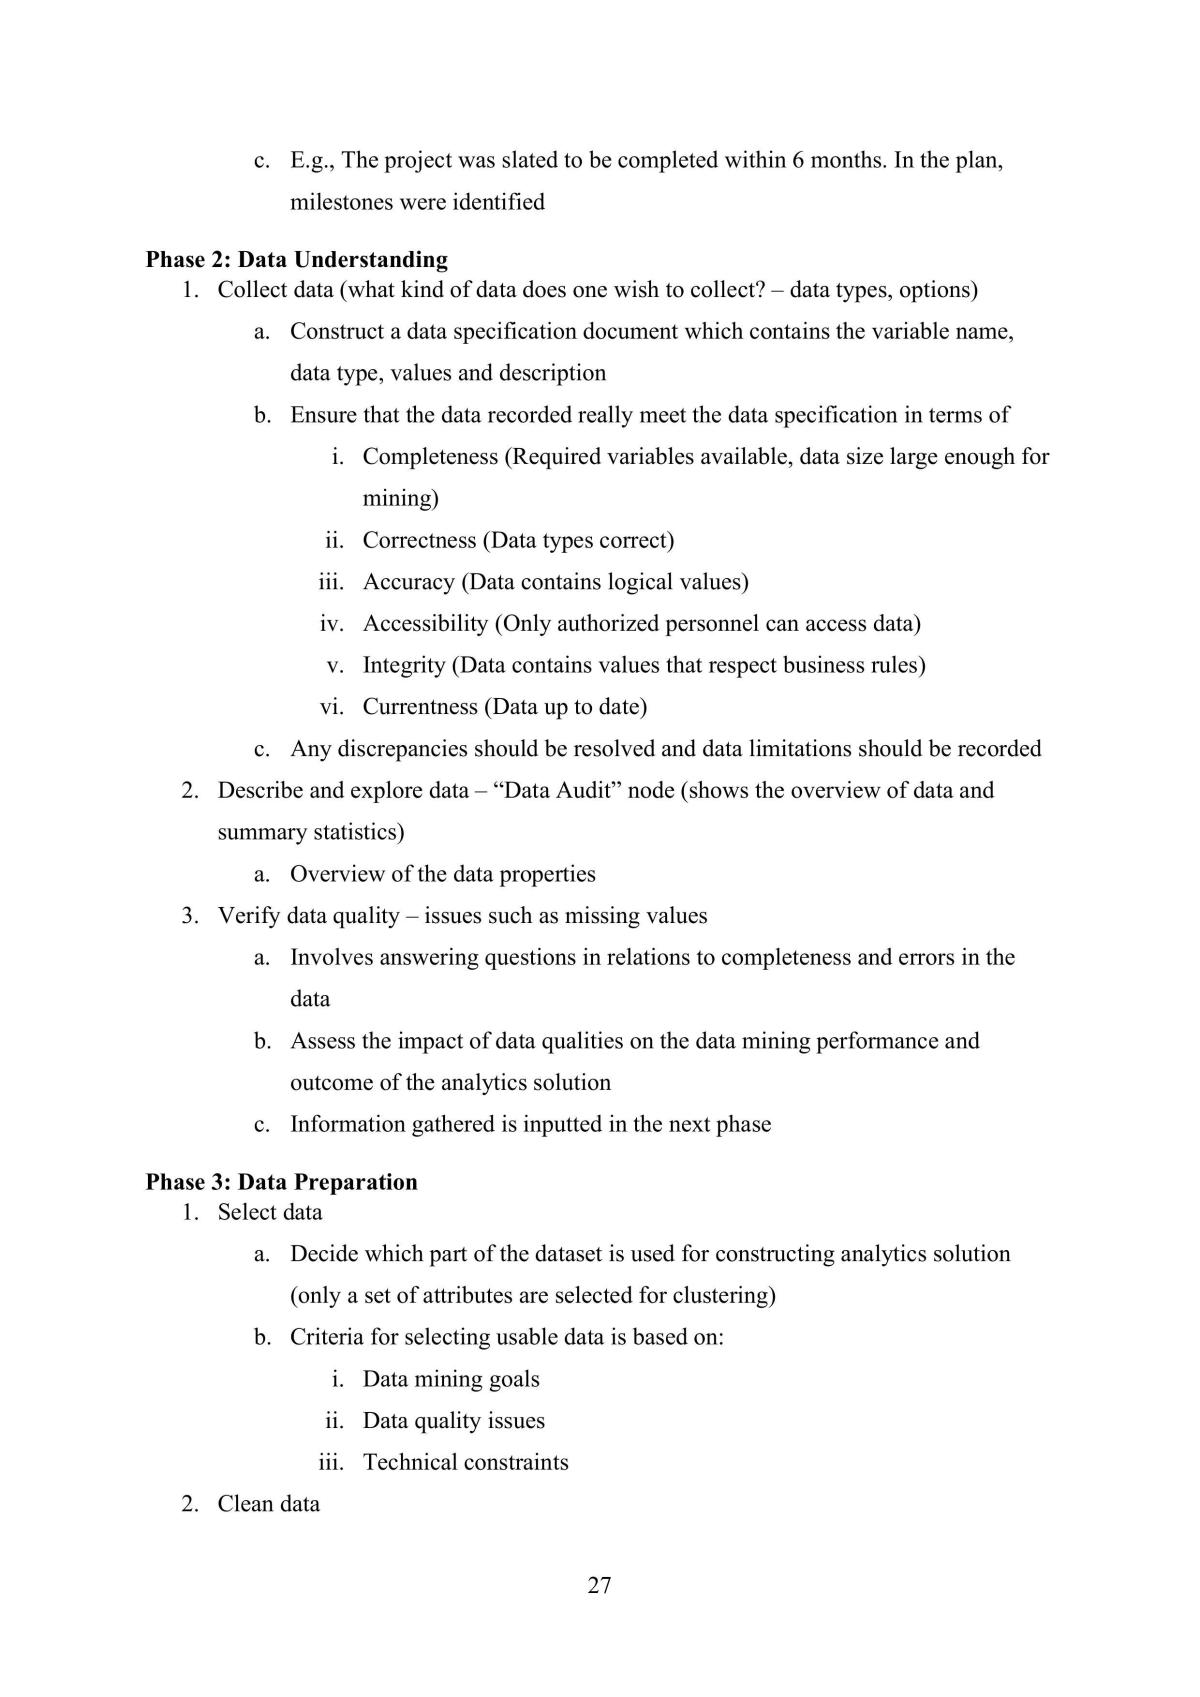 ANL303 Fundamentals of Data Mining Study Notes - Page 27